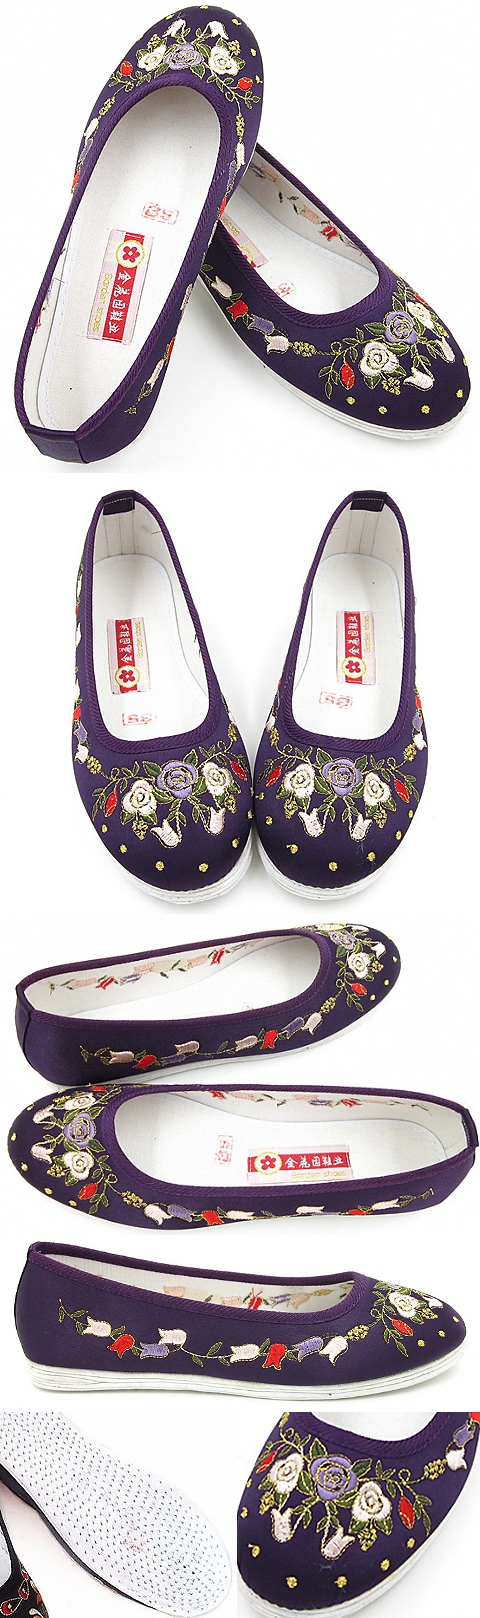 Satin Pomegranate Flower Embroidery Shoes (Purple)